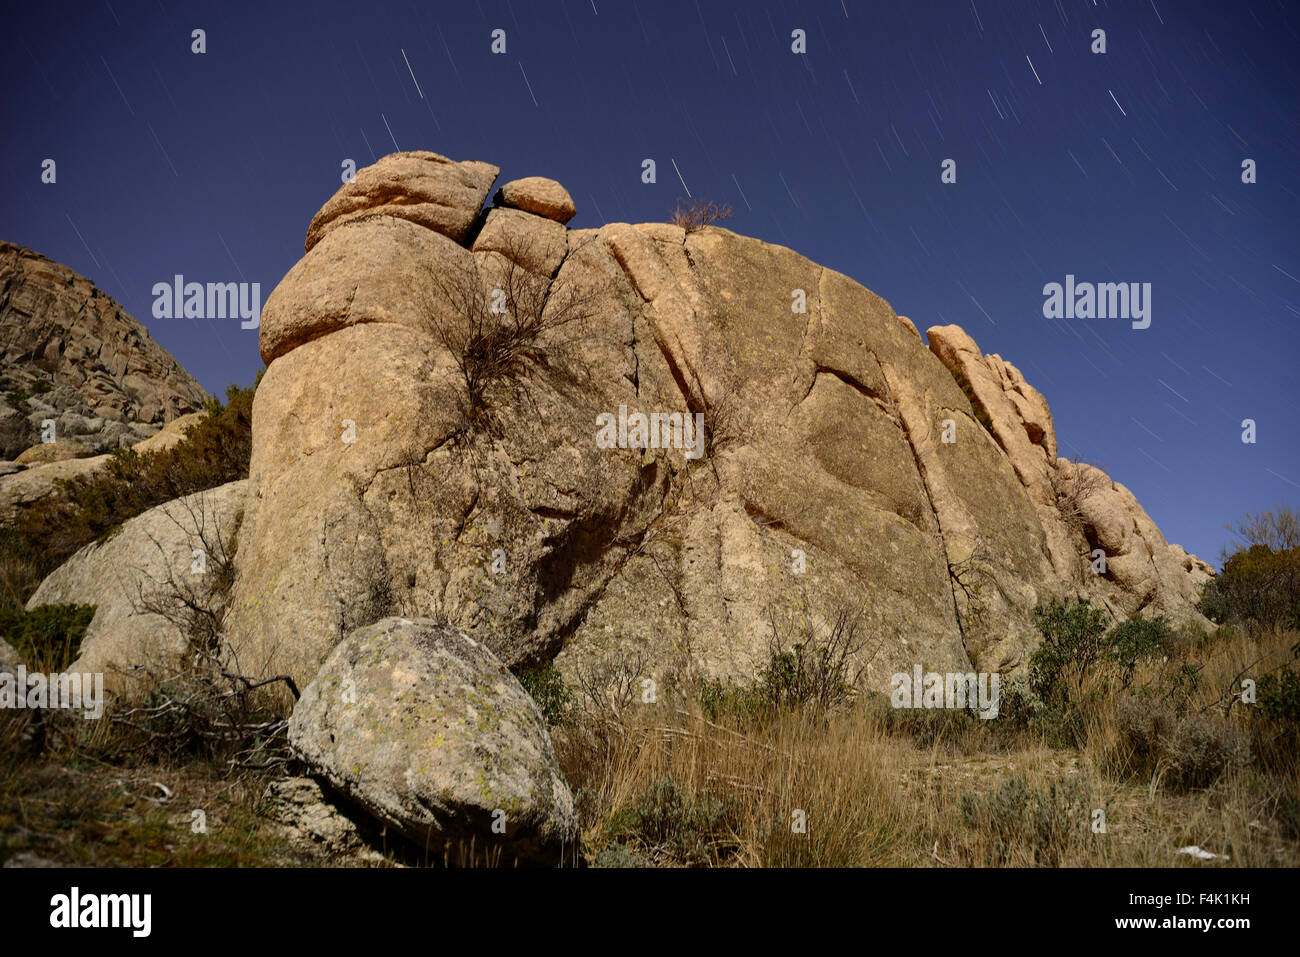 Rock with elephant shape in La Cabrera mountains at night, Madrid province, Spain Stock Photo